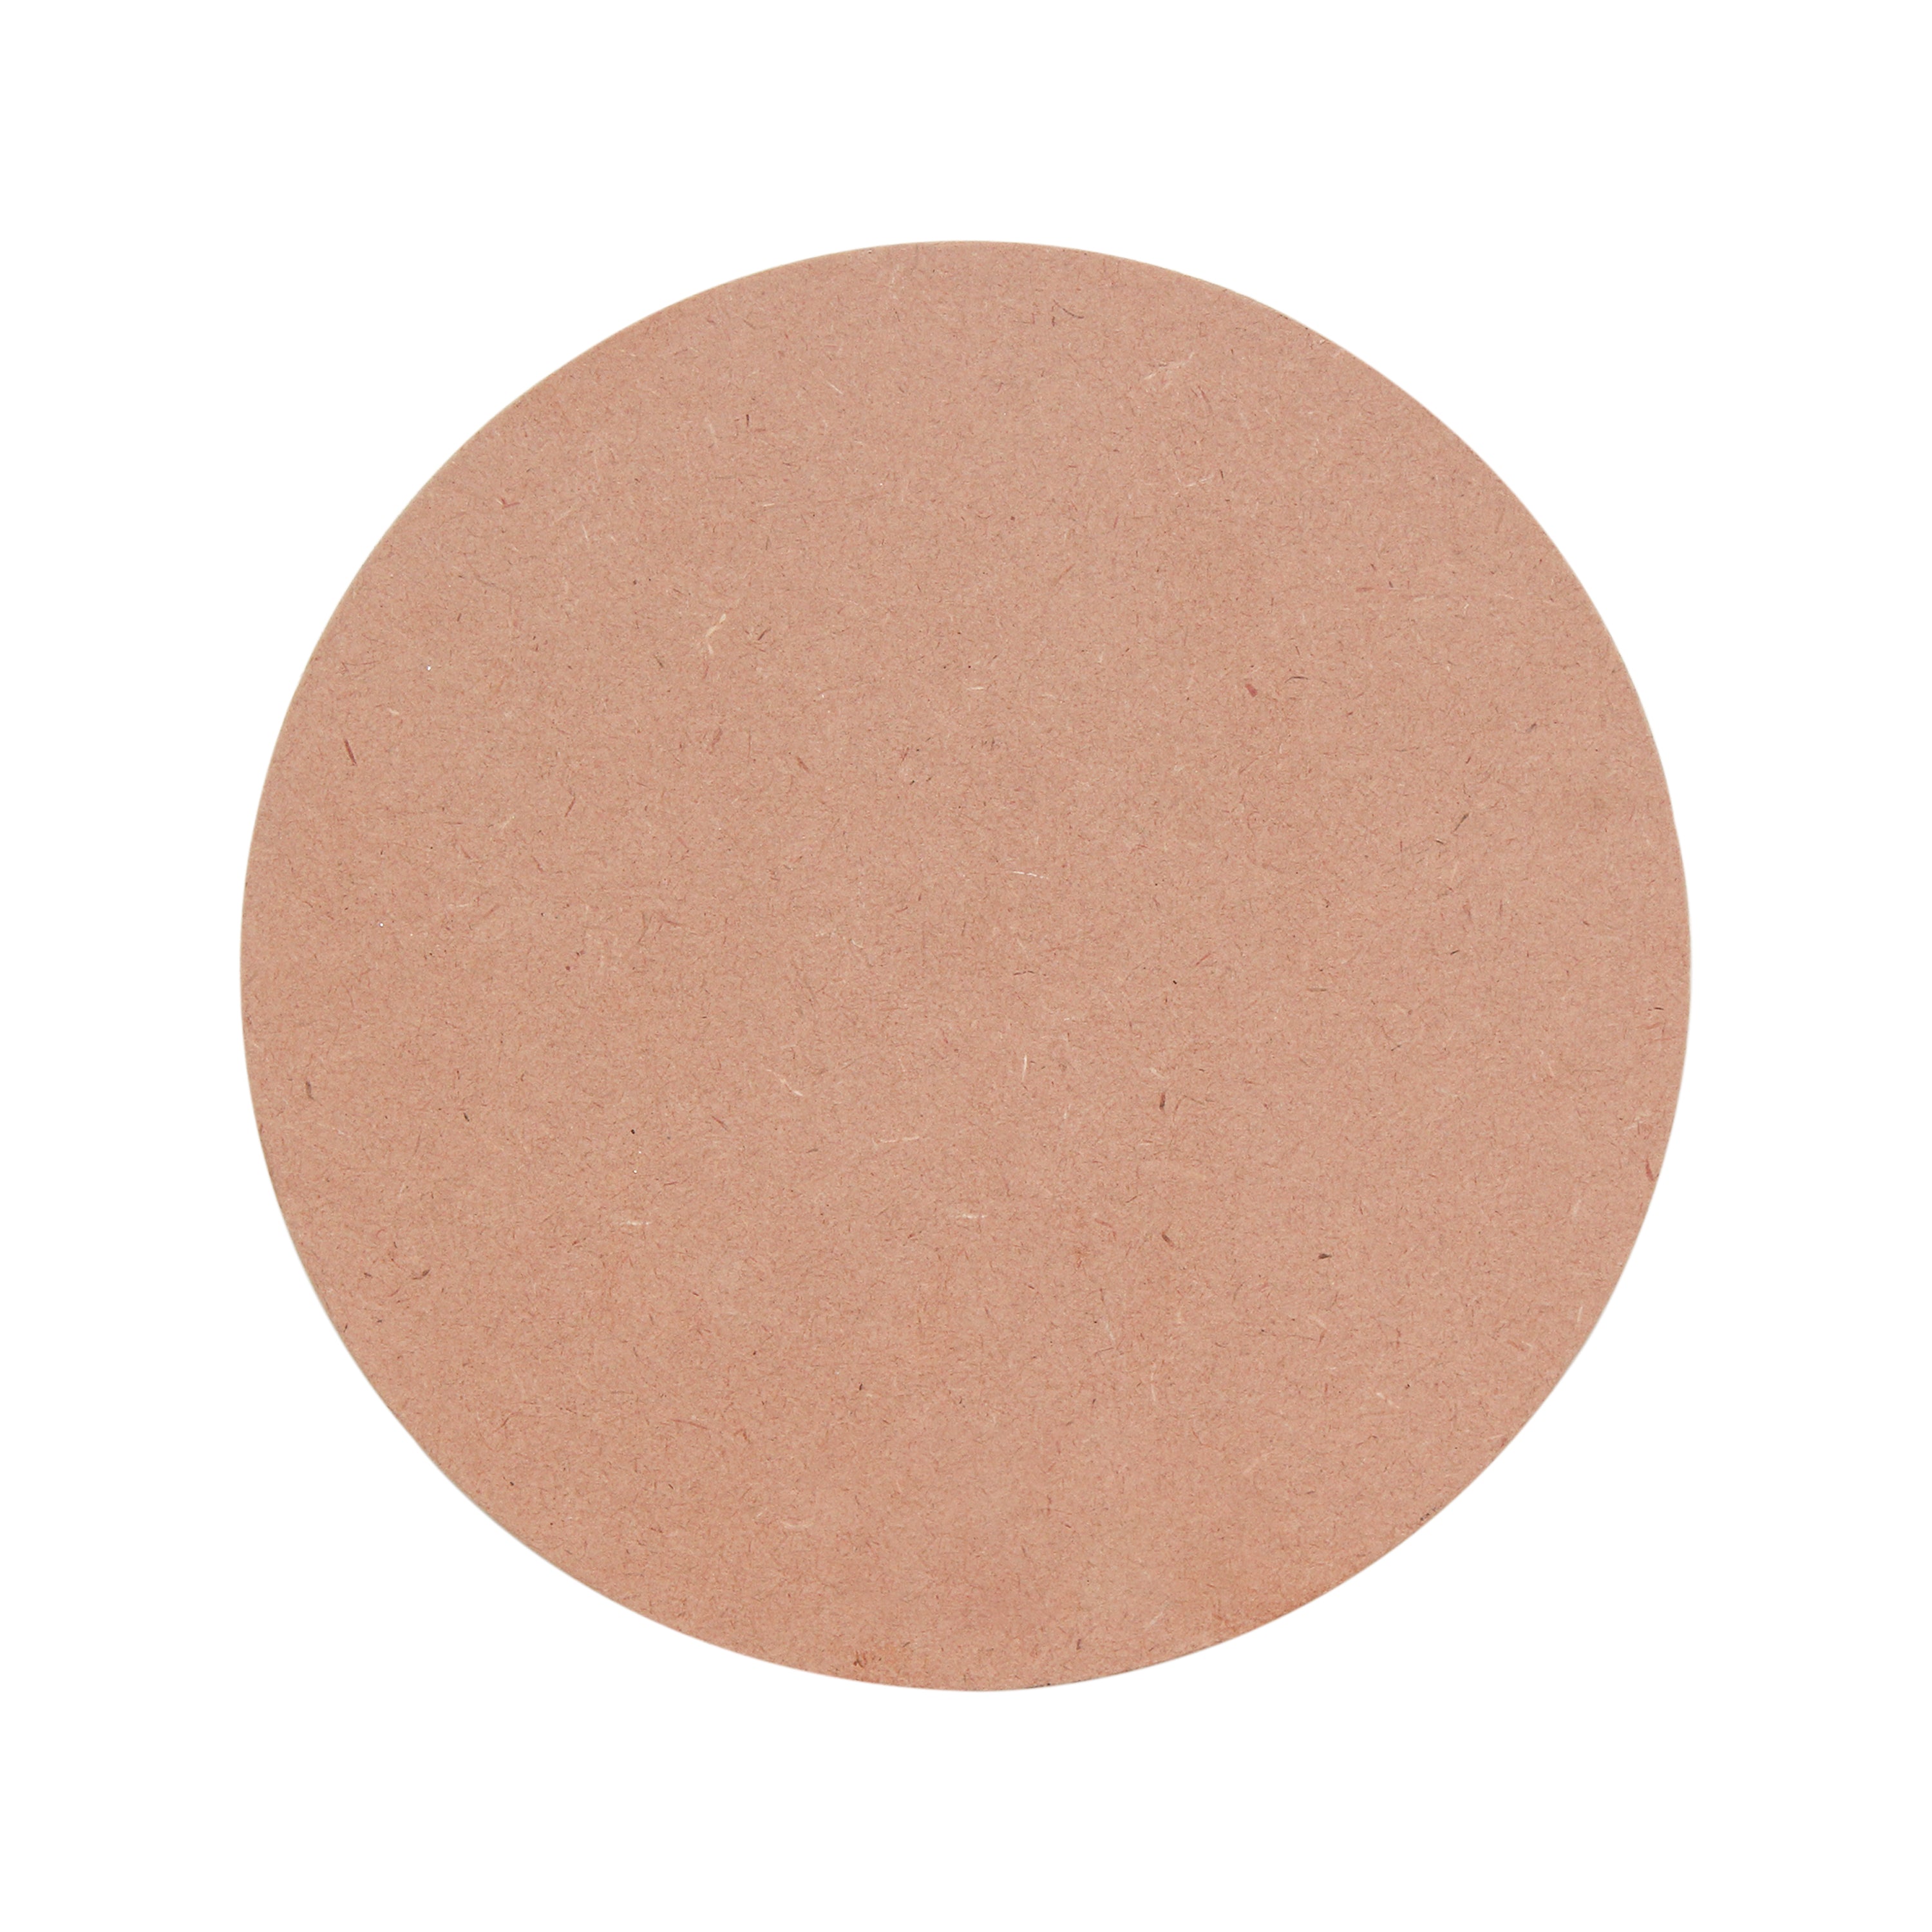 Mdf Blank Round 10Inch Dia 5.5Mm Thick 1Pc Lb